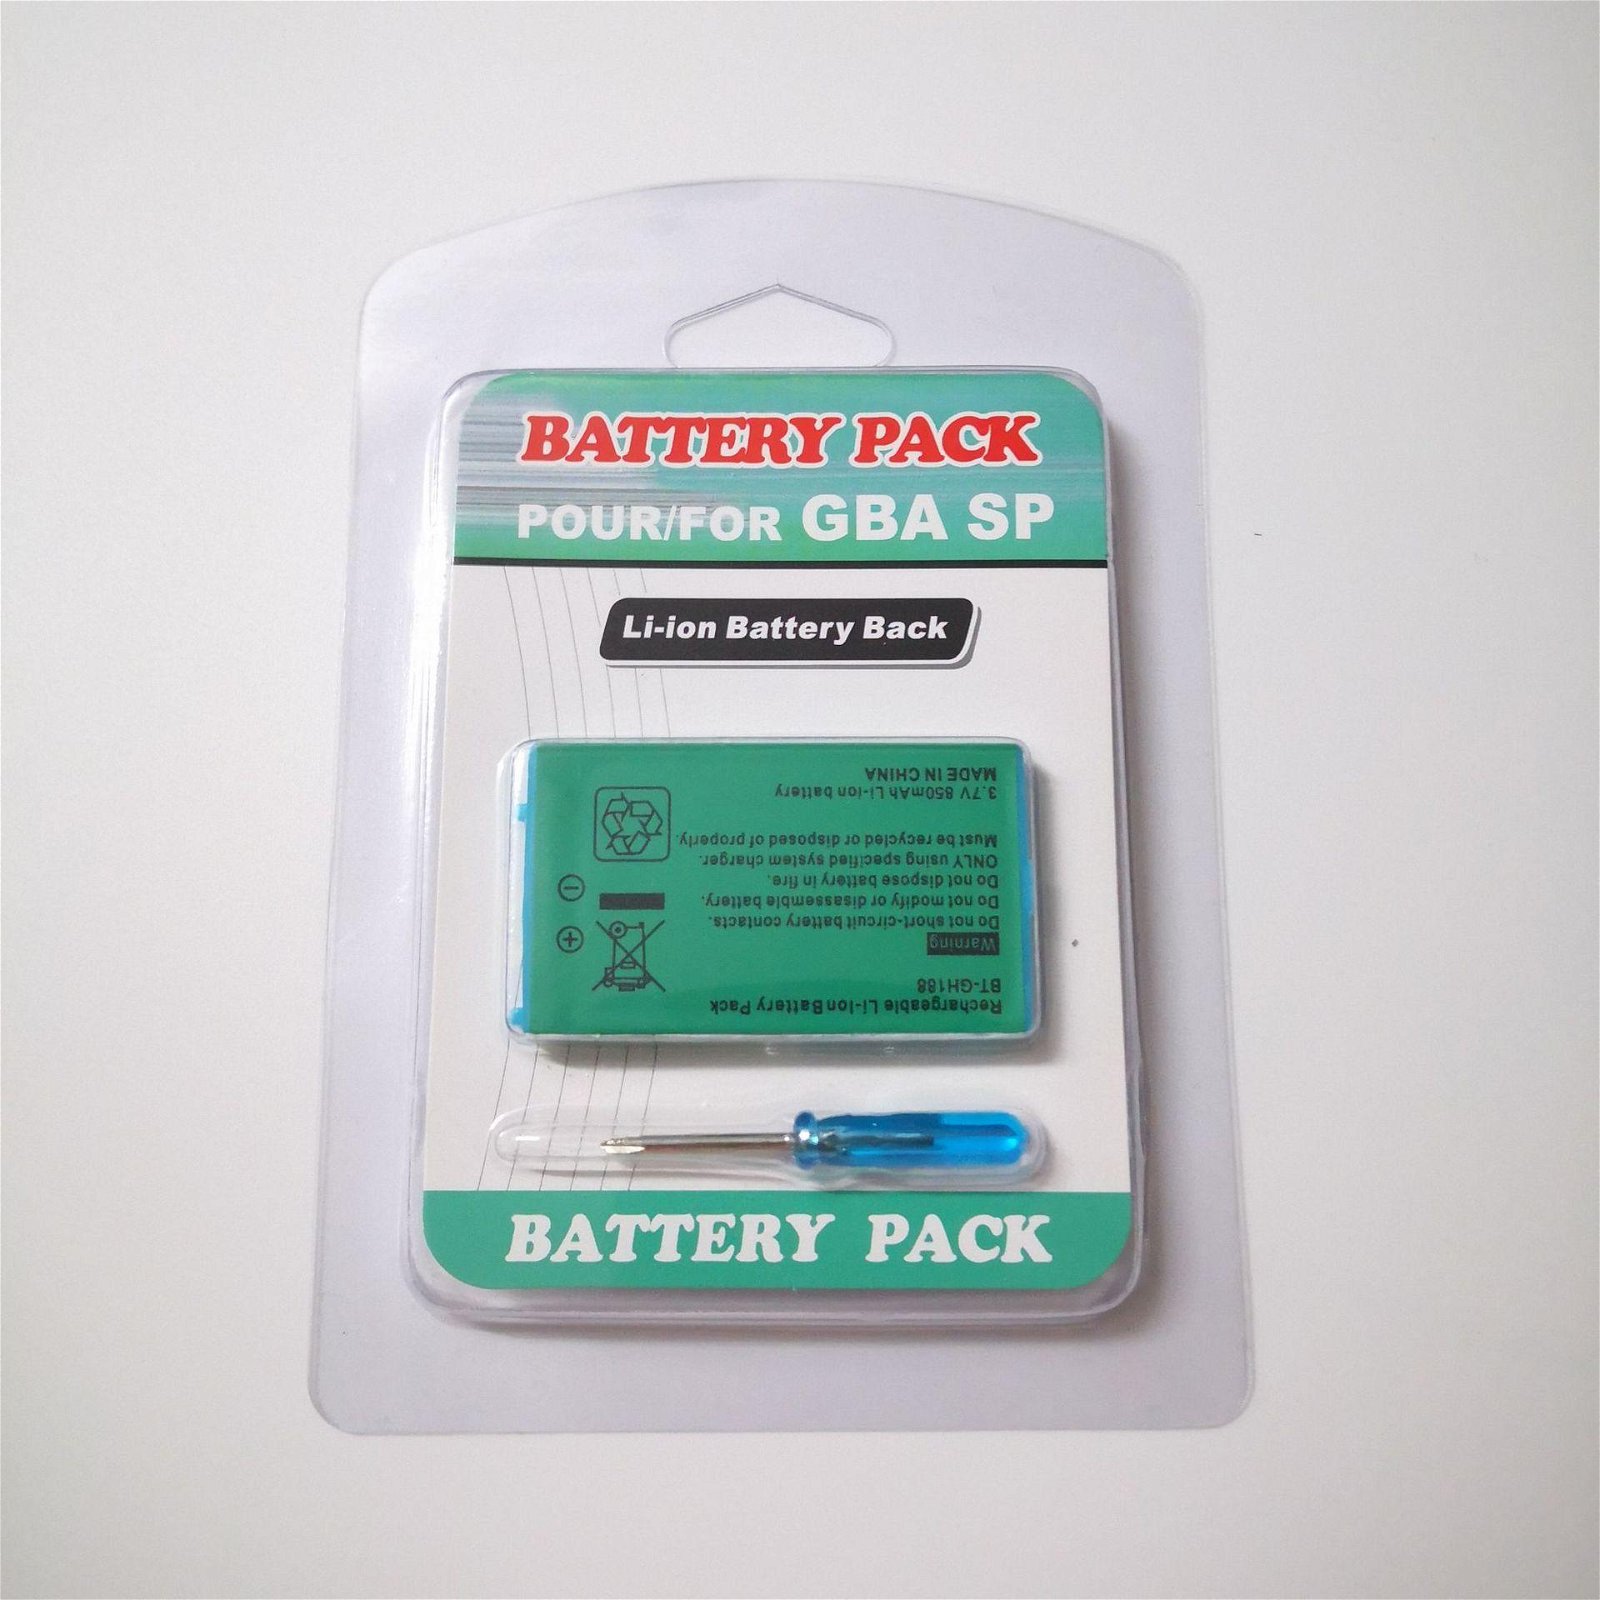 GBA SP Battery PACK with Screwdriver for GameBoy Advance High Quality 3